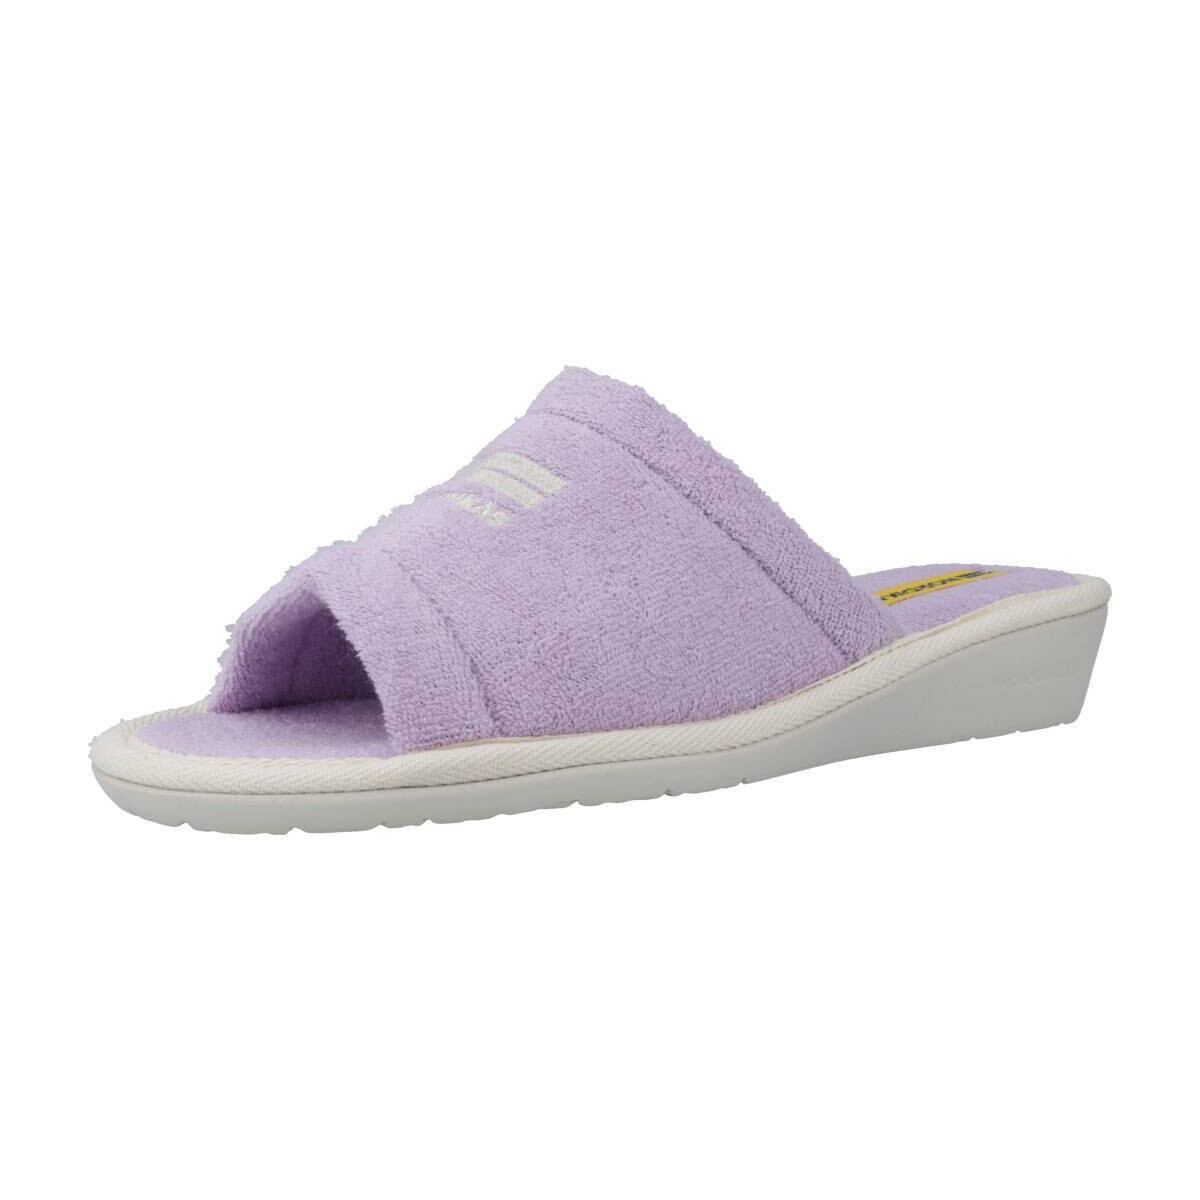 Chaussures Femme Chaussons Nordikas TOALLA Violet